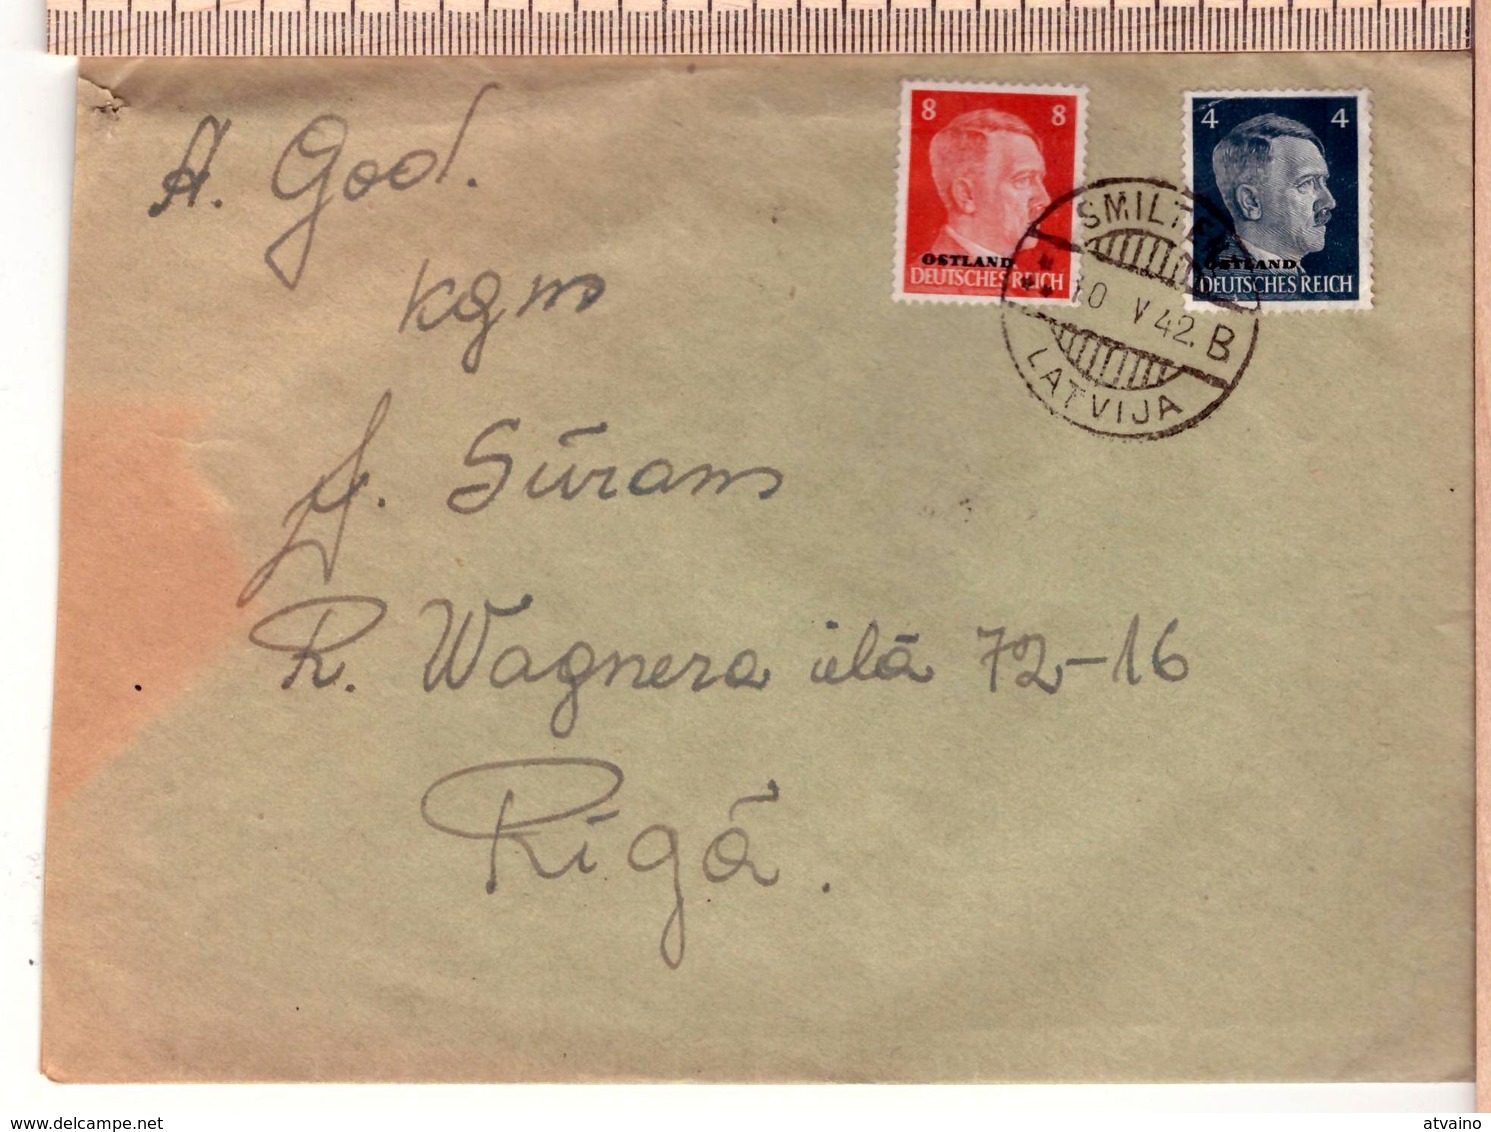 Latvia Lettland Cover In German Time To Riga With Cancel SMILTENE "B" 10.5.1942 - Lettonia